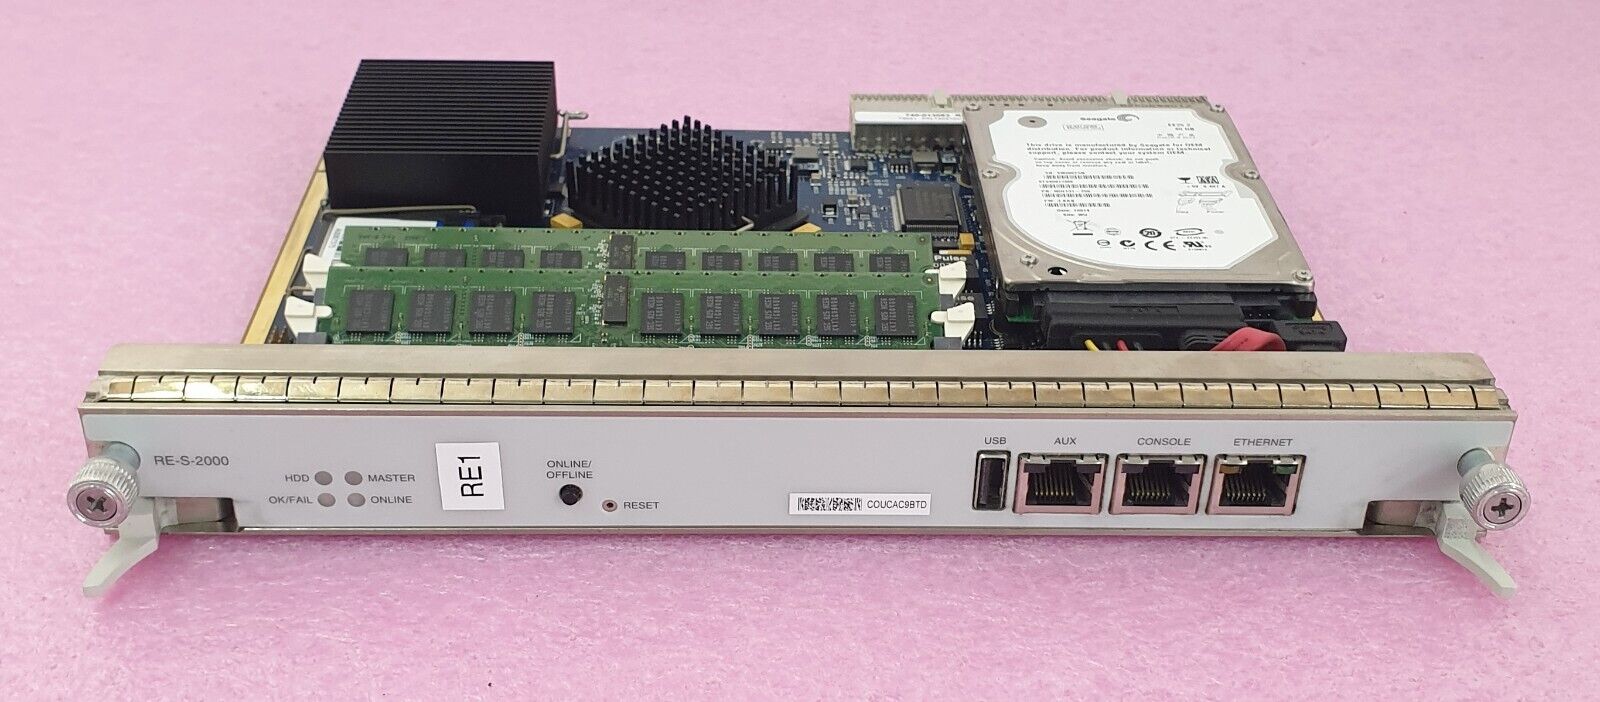 Juniper Networks RE-S-2000  740-013063 Routing Engine Module